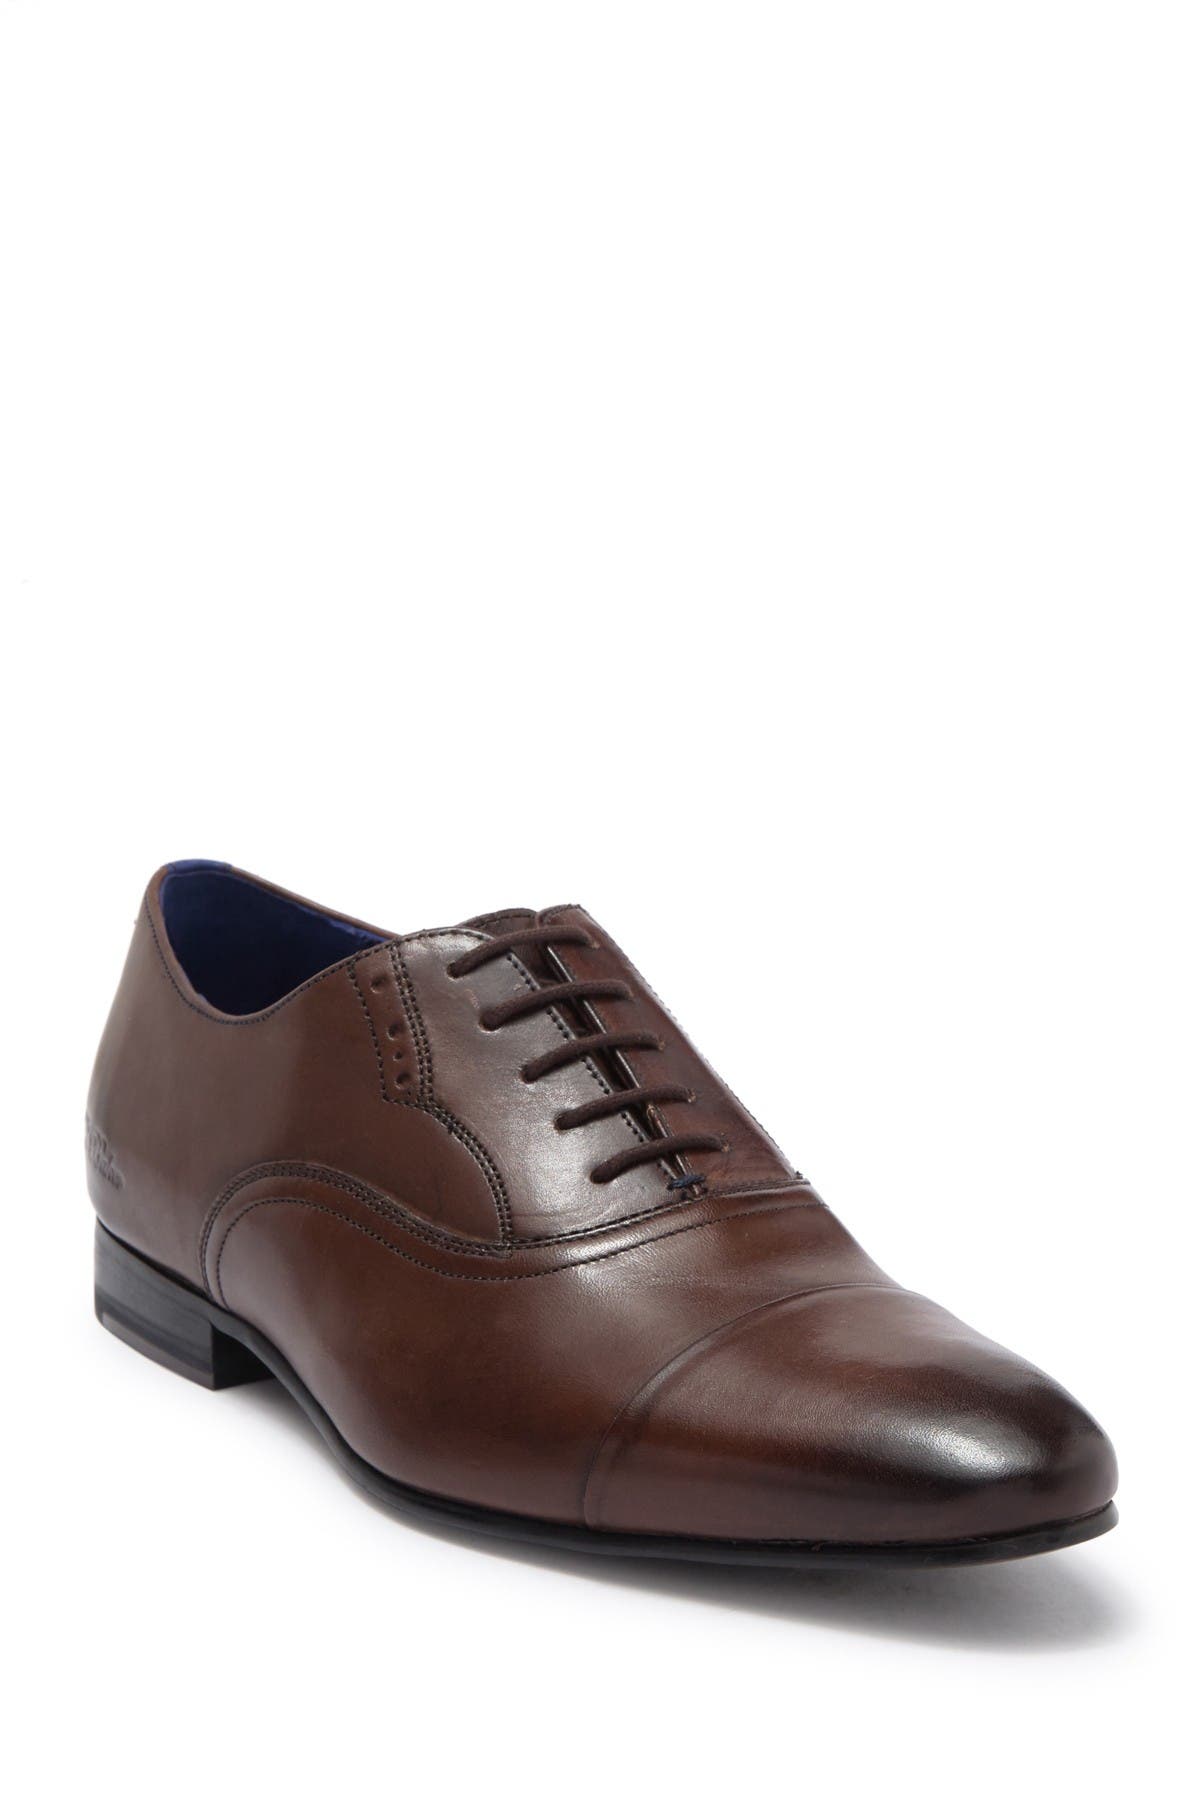 ted baker oxford brogues